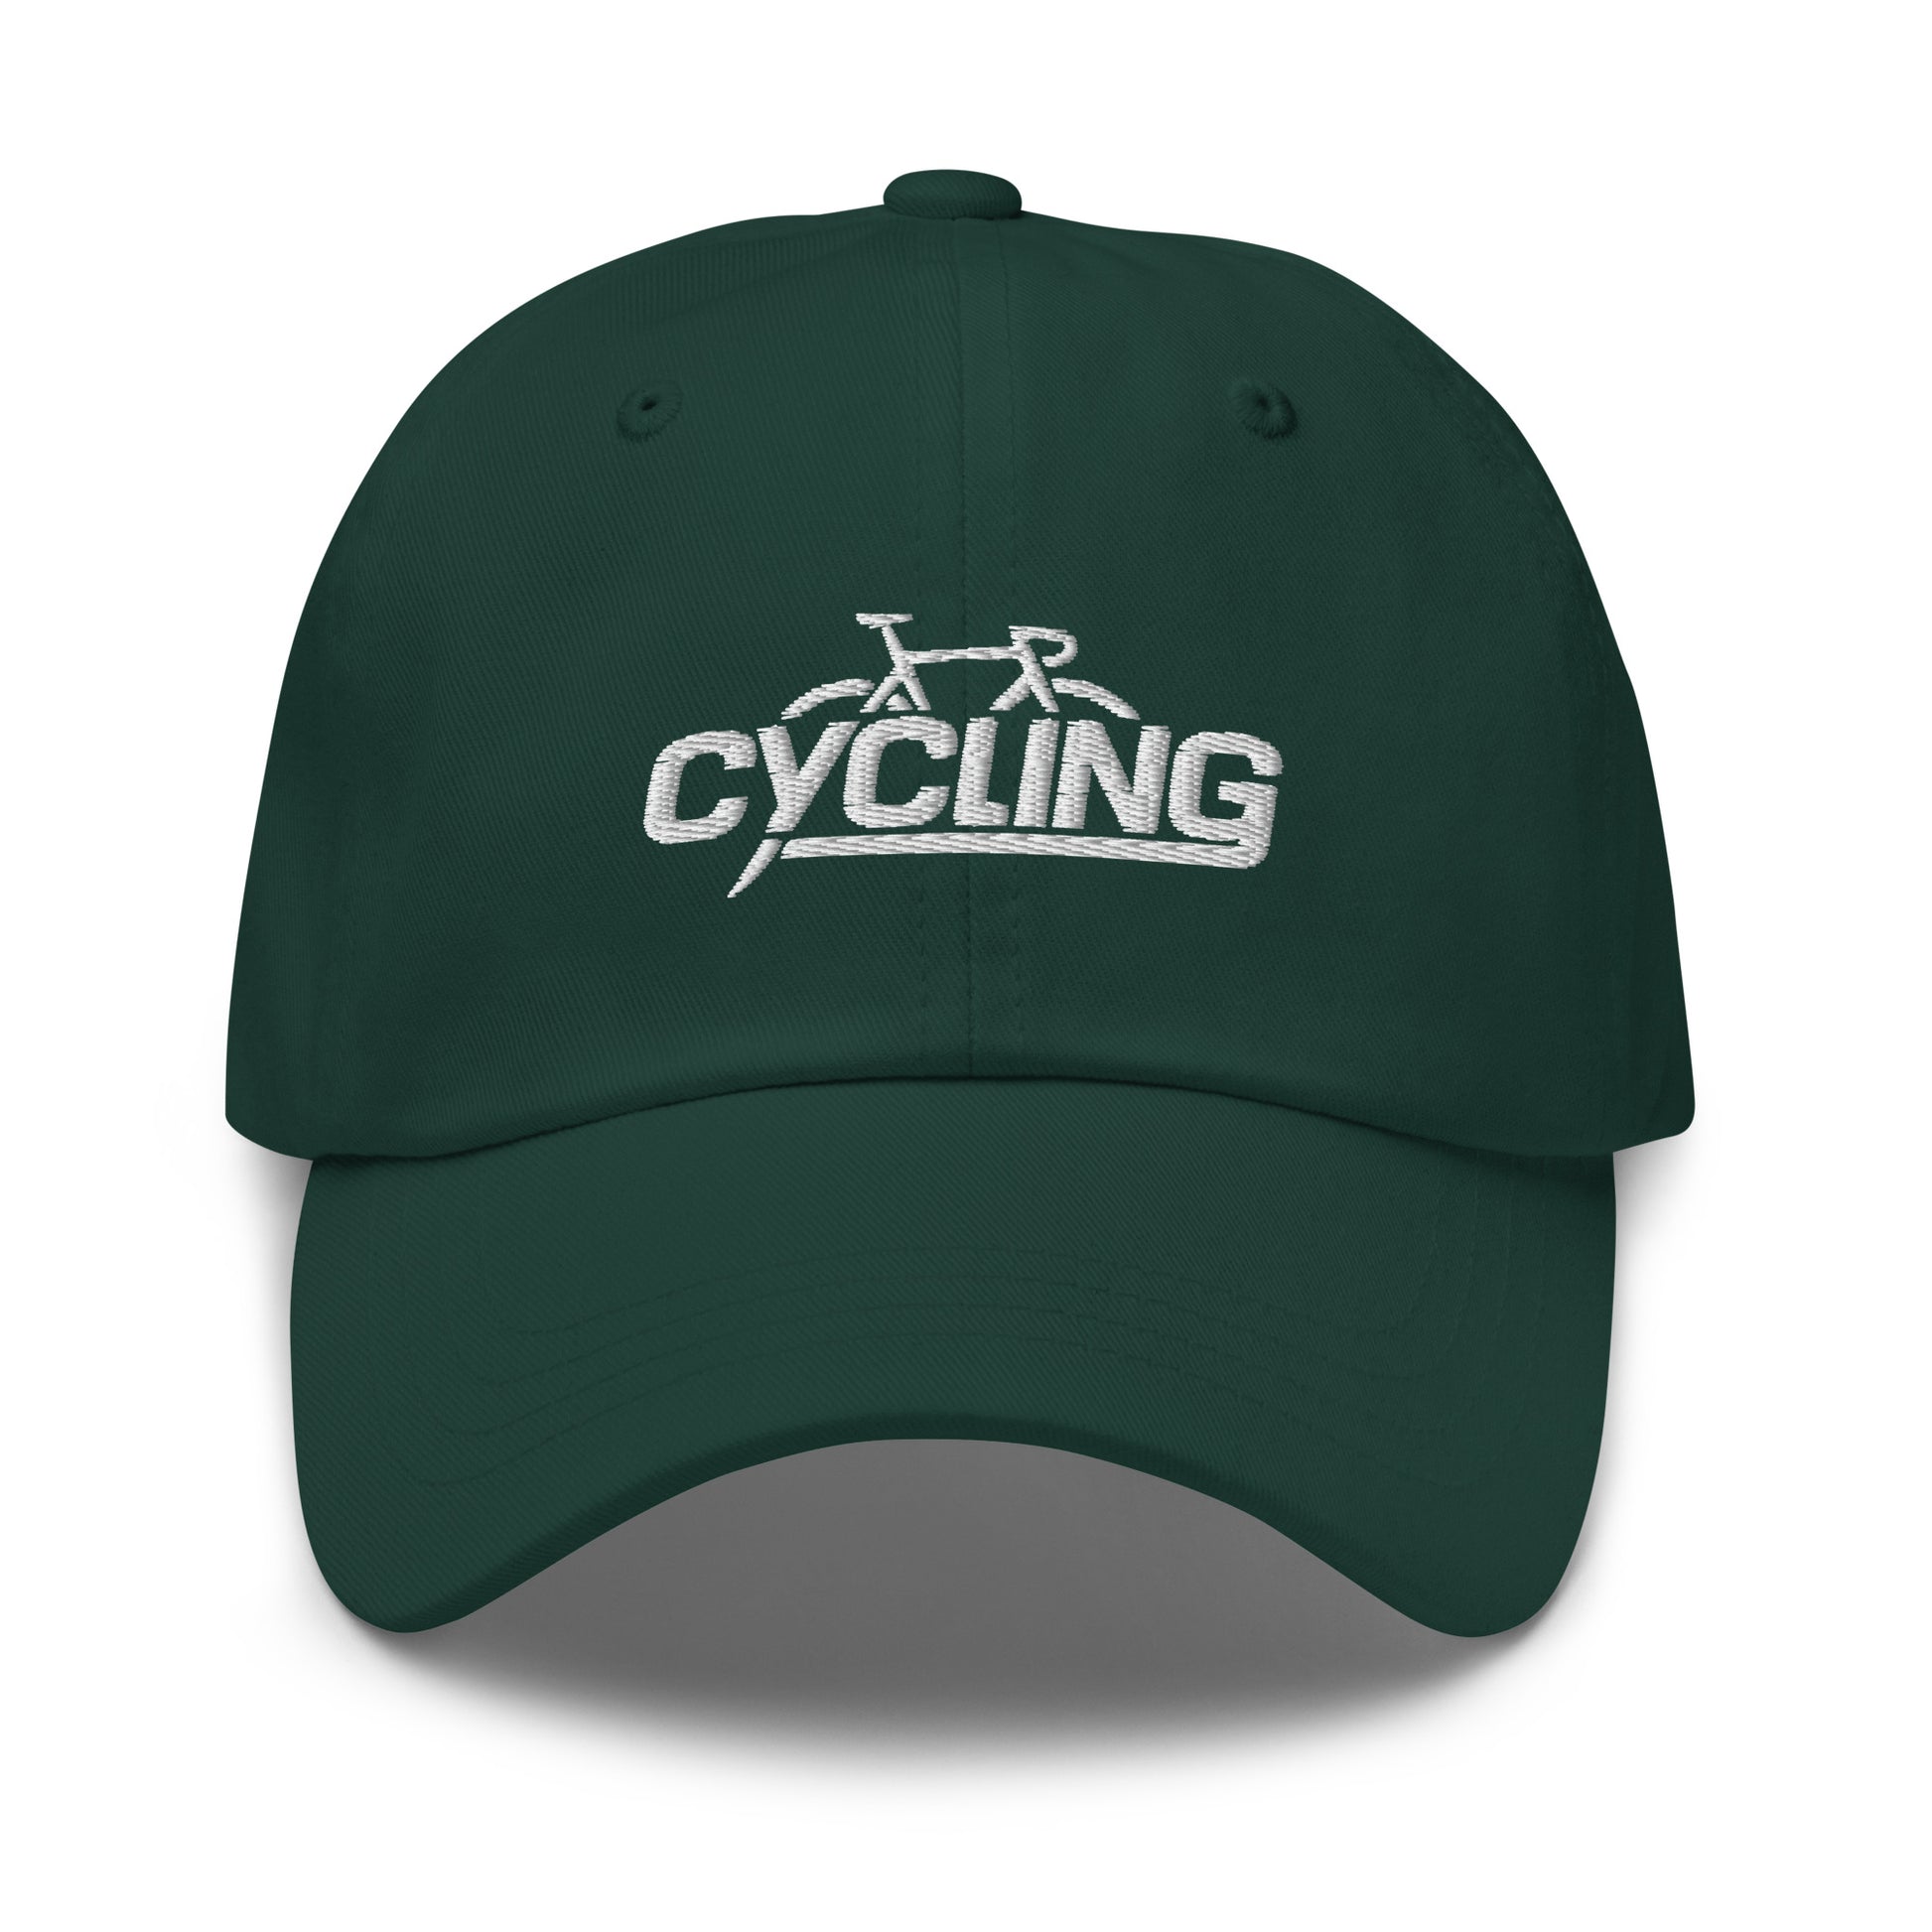 Cycling hat, Bicycle hat, bike hat, cycle hat green